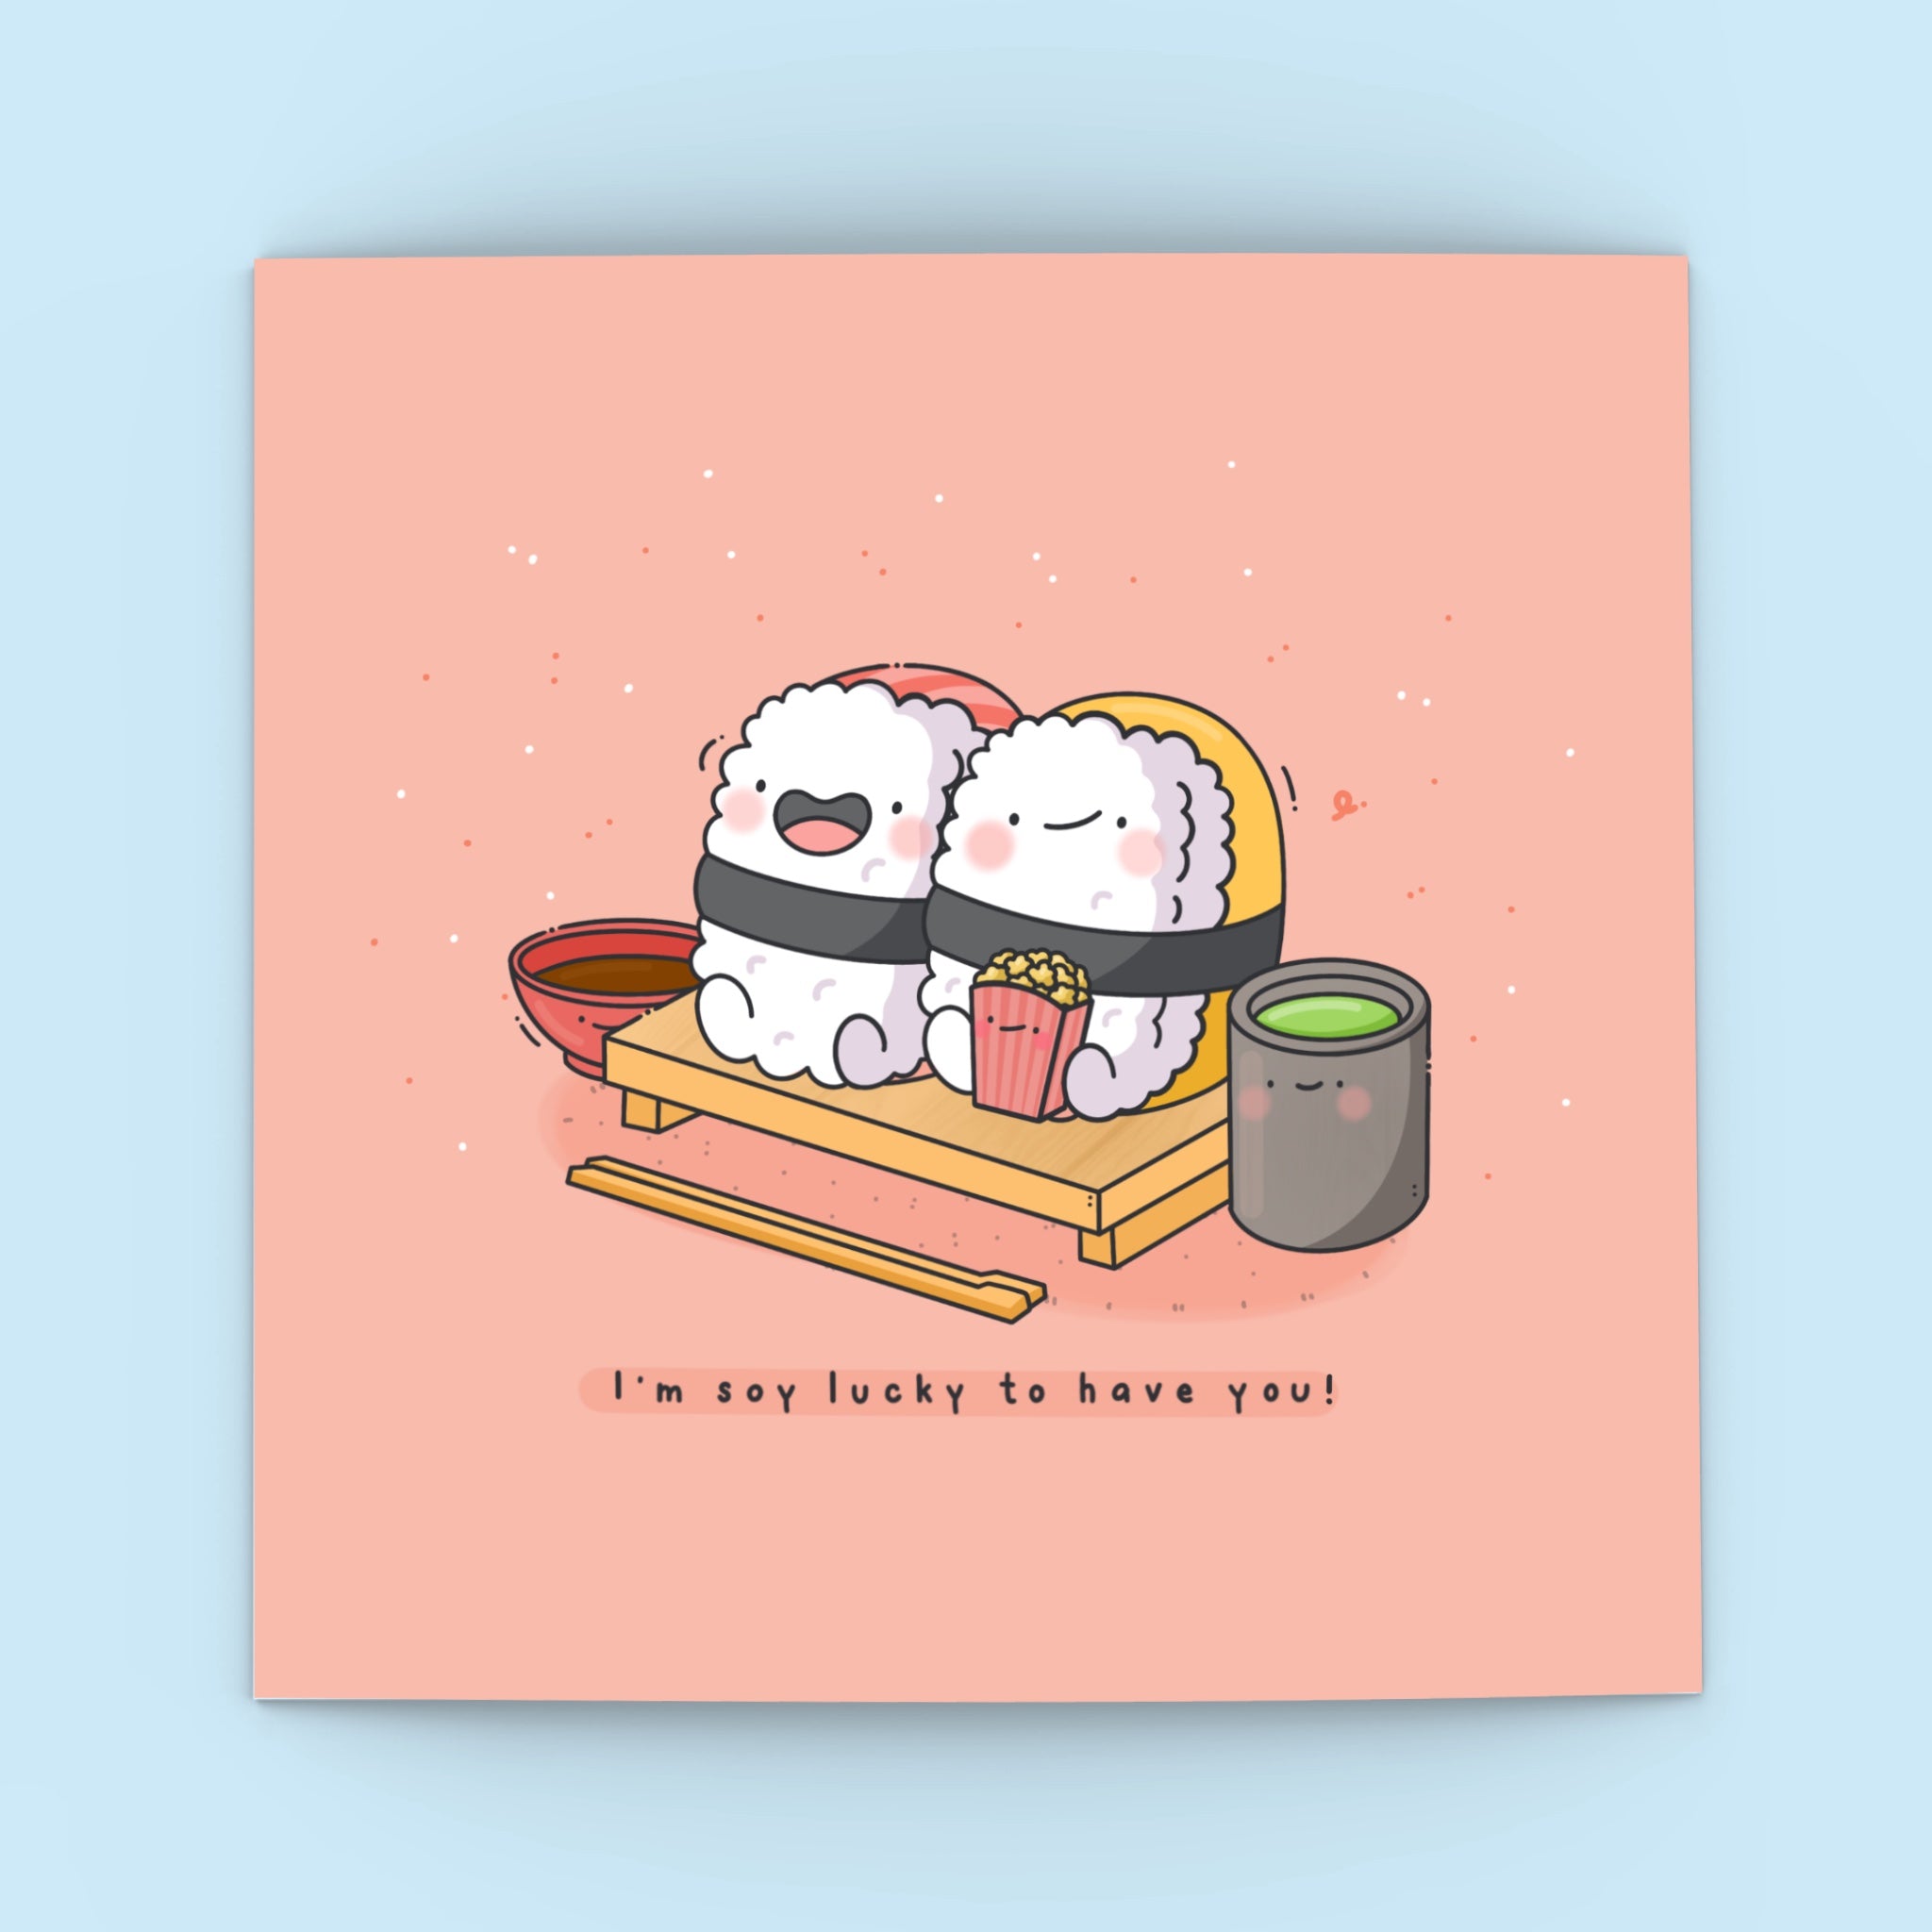 Cute Sushi Card on blue background